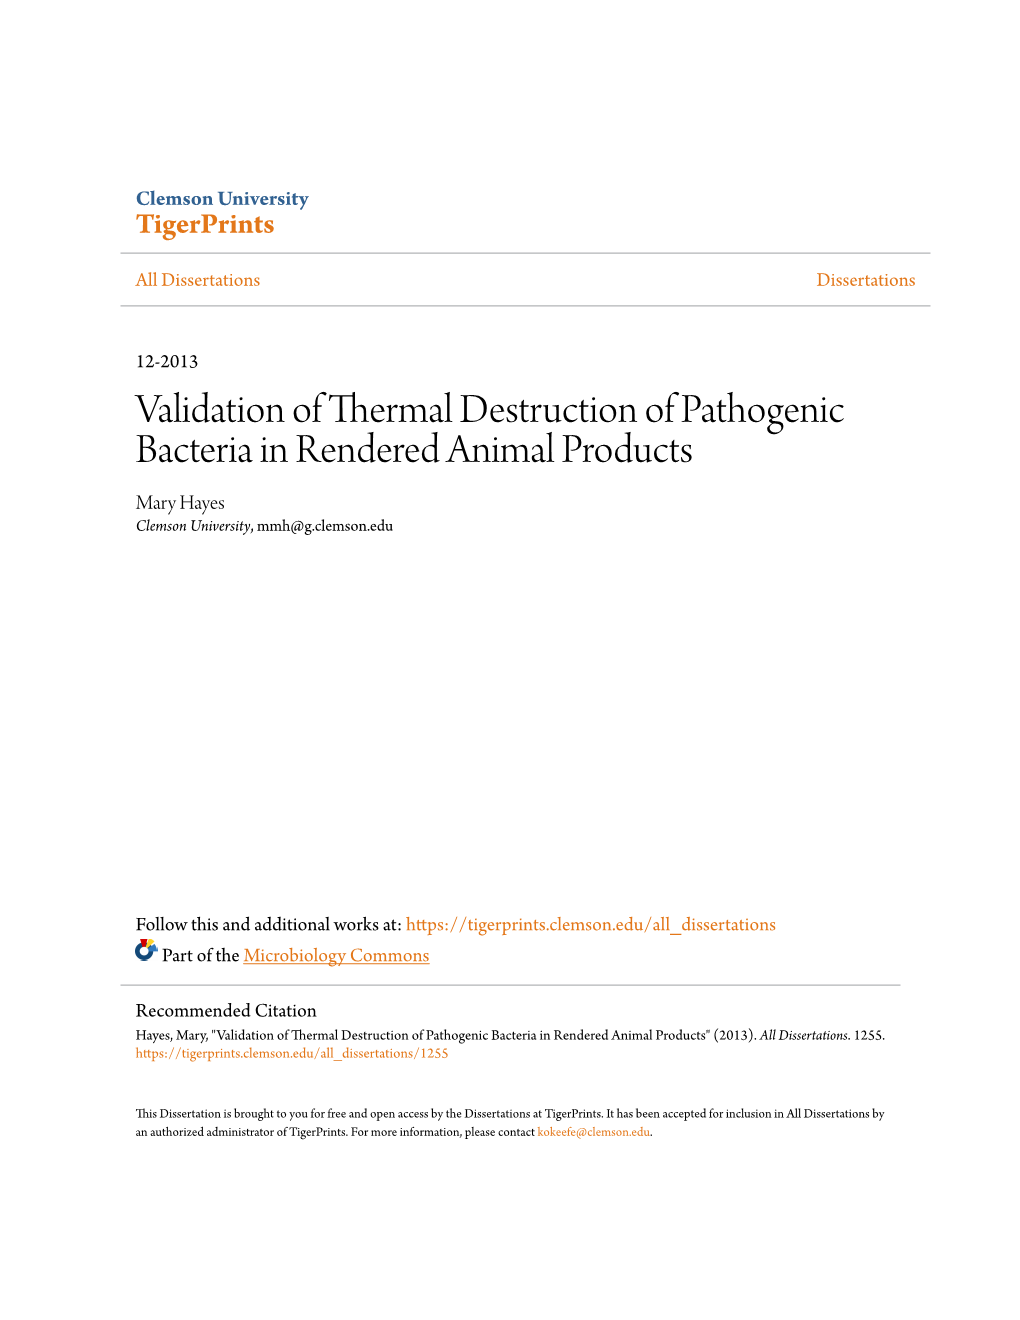 Validation of Thermal Destruction of Pathogenic Bacteria in Rendered Animal Products Mary Hayes Clemson University, Mmh@G.Clemson.Edu